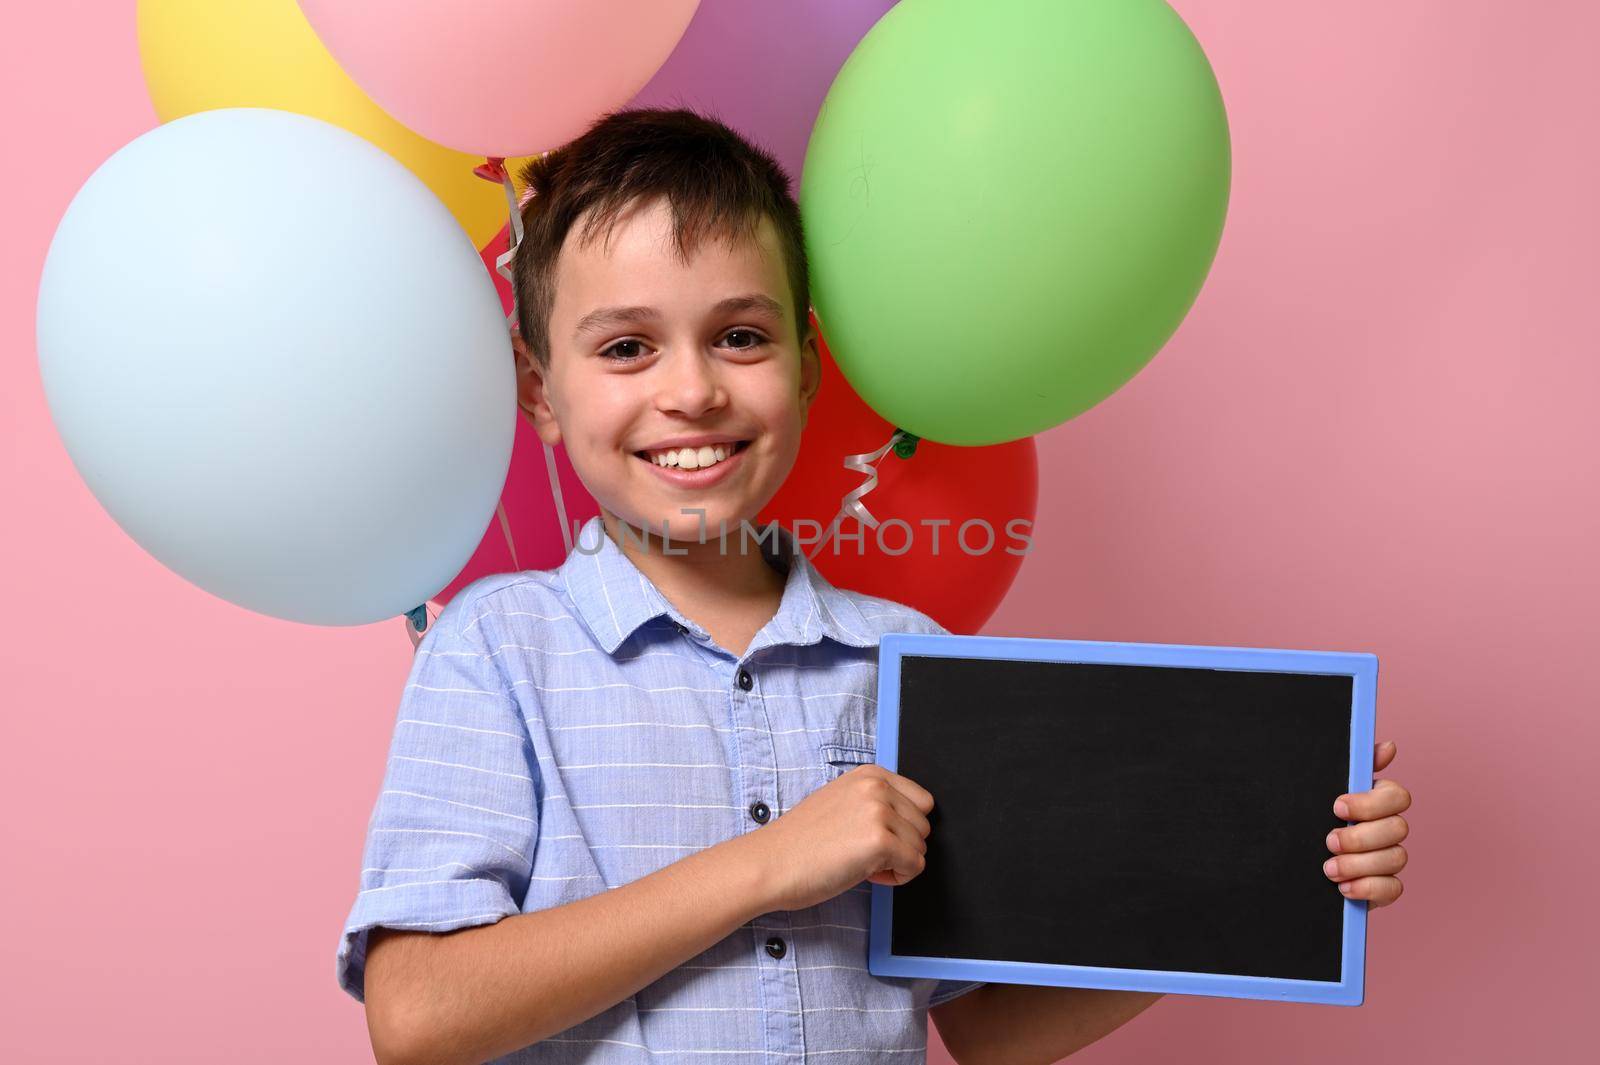 Adorable smiling schoolboy with empty blank chalkboard in his hand standing against multicolored balloons on pink background with copy space by artgf